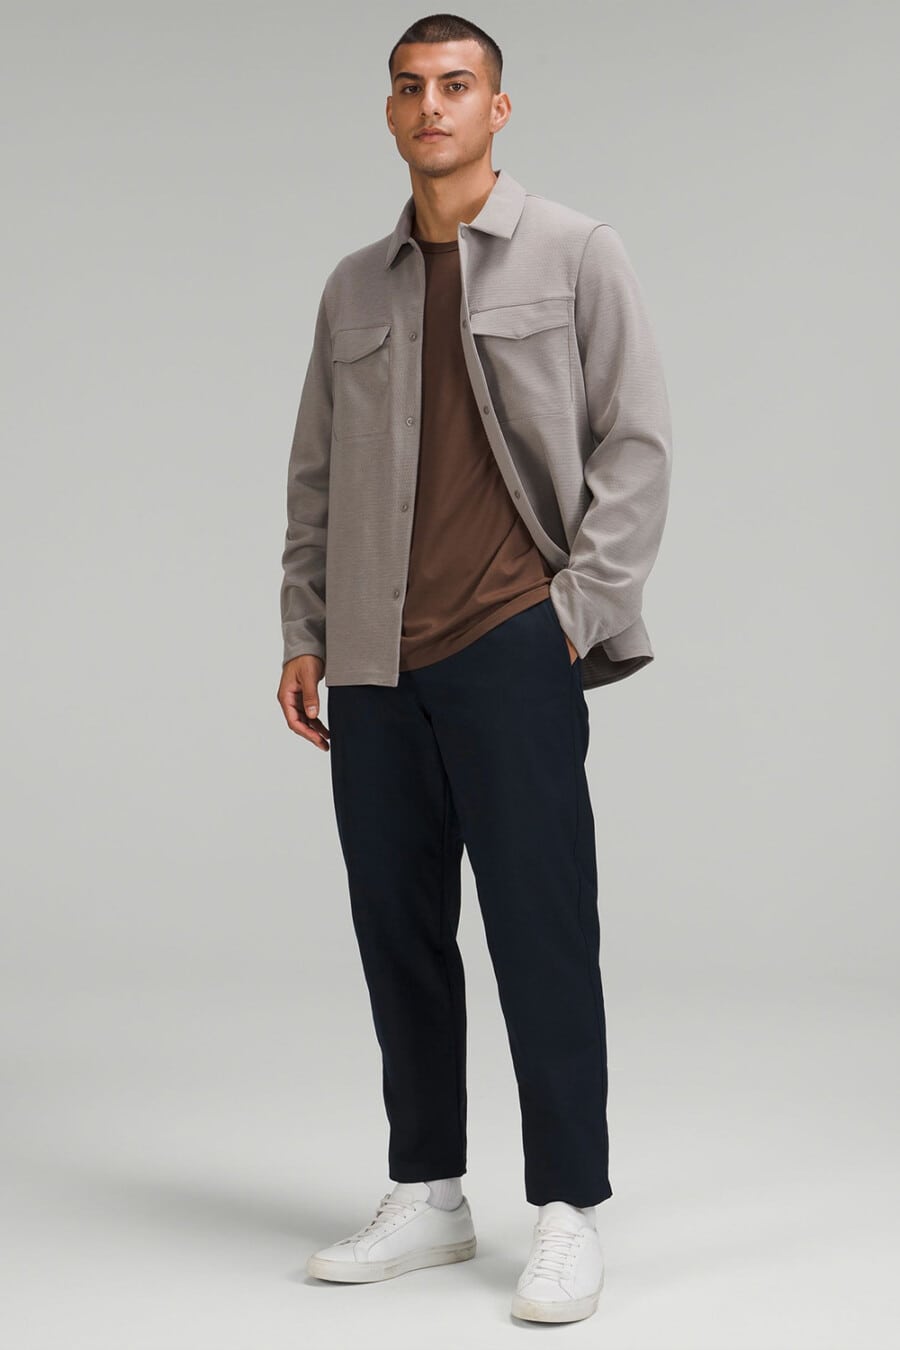 Men's cropped navy pants, brown T-shirt, light brown overshirt, white socks and white sneakers outfit